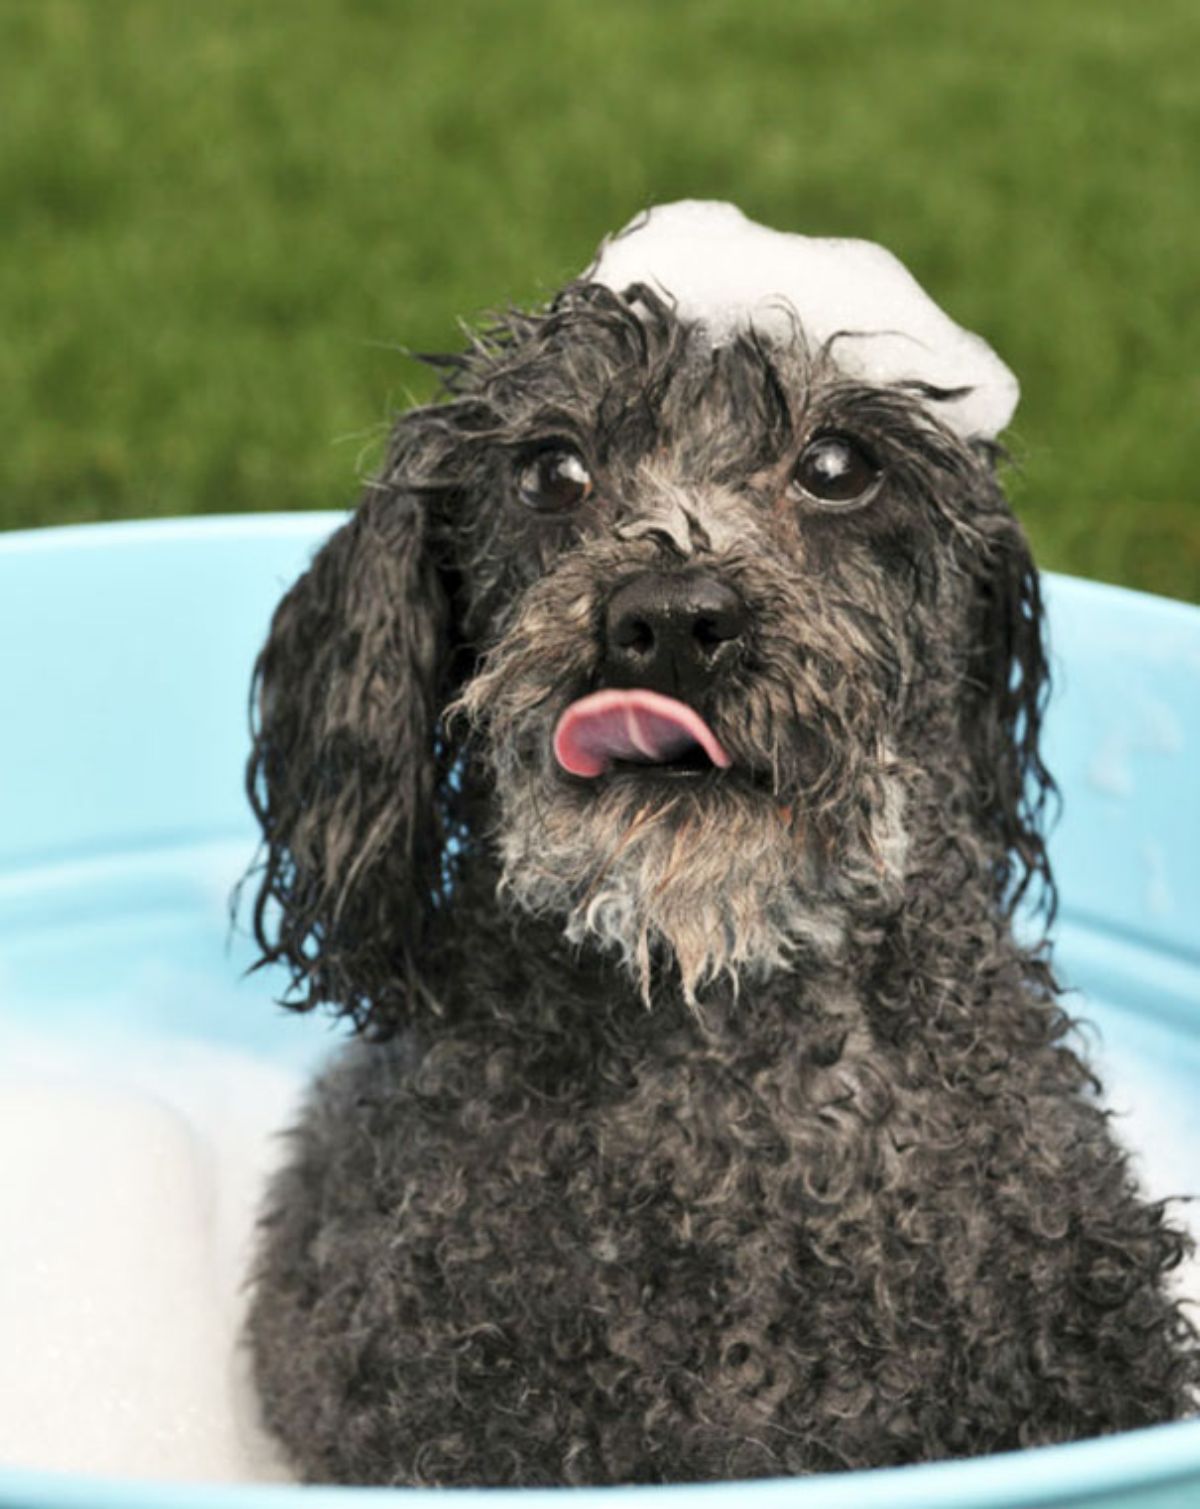 wet black poodle in a green basin with soap suds around the dog and on the head